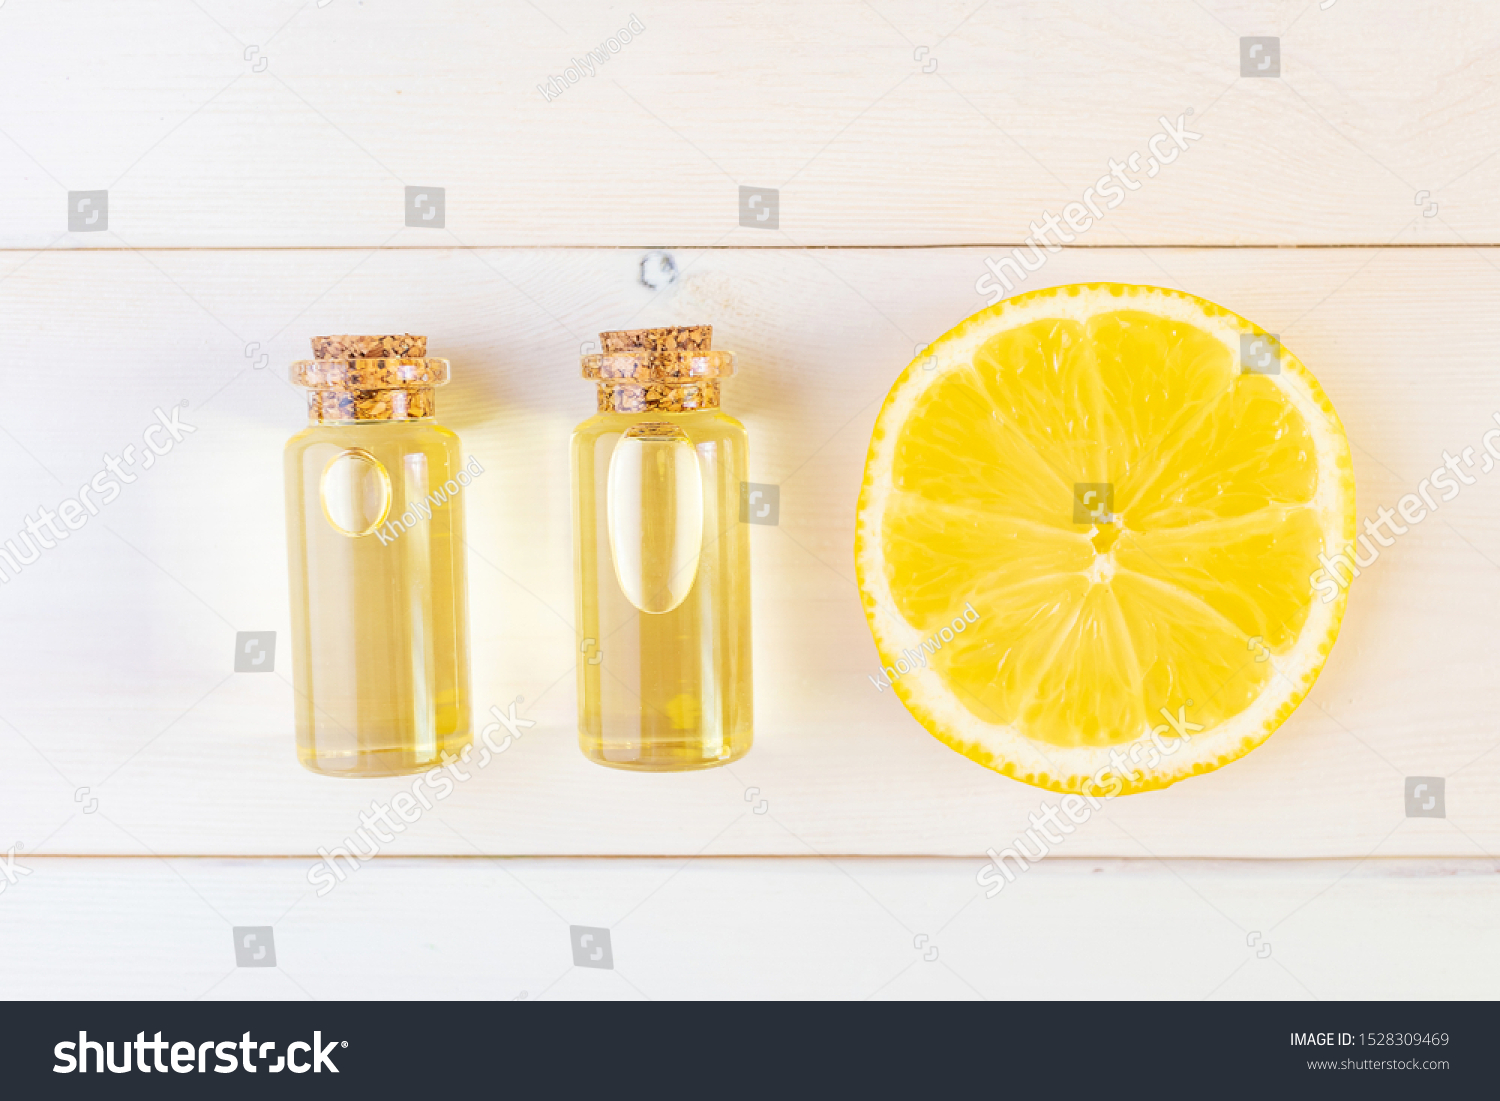 The concept of aromatherapy, relaxation, organics. Transparent bottles with essential oil, lemon on a light wooden background. Organic apothecary. Place for text. Minimalism, top view, flat lay. #1528309469